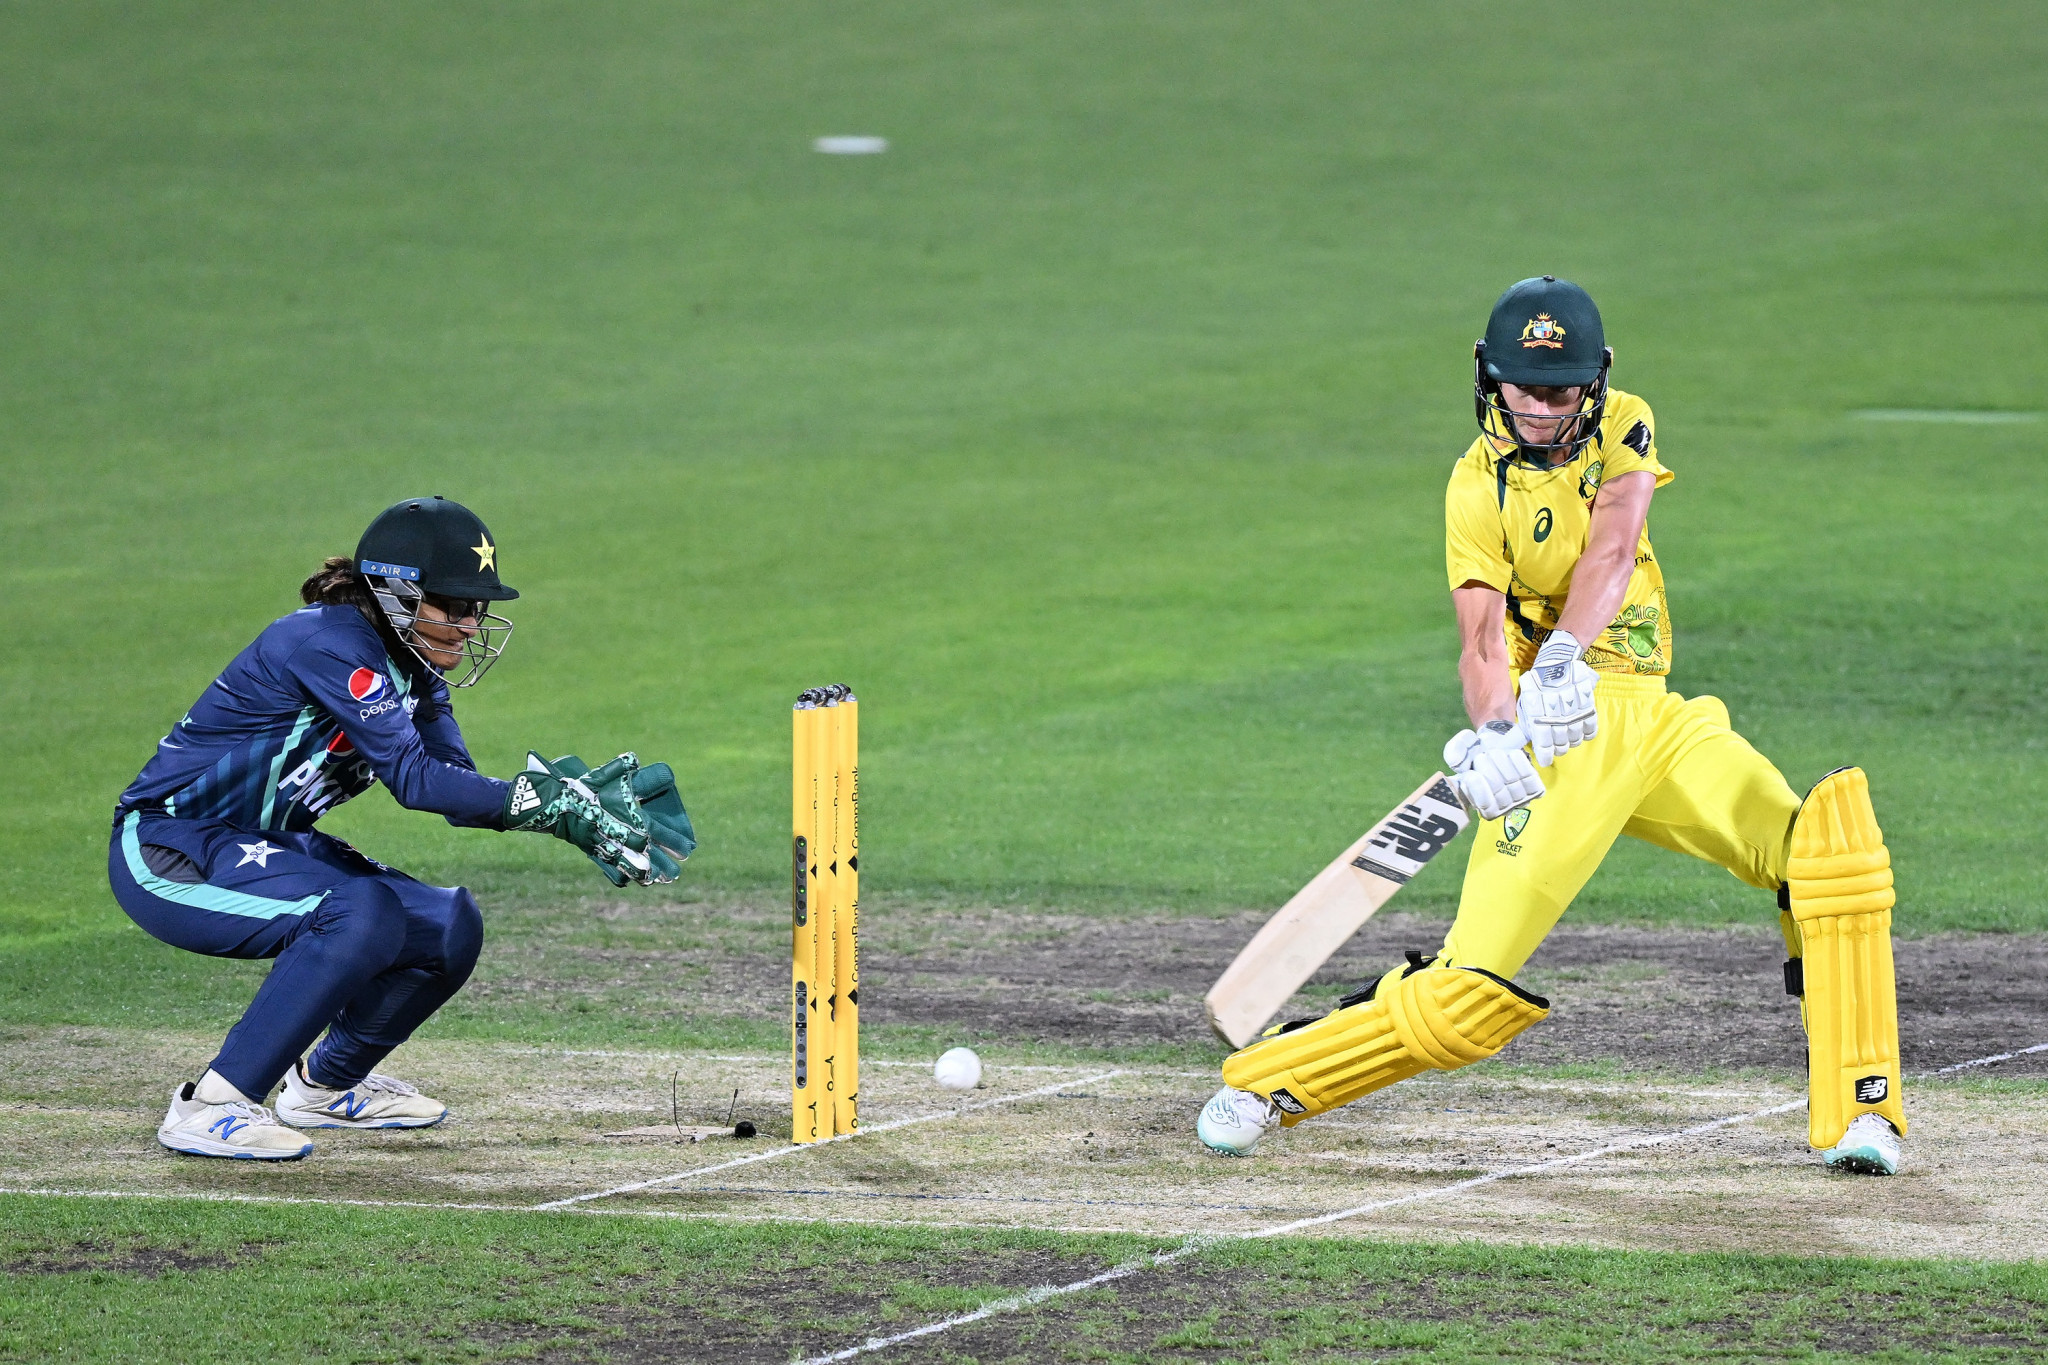 Australia aiming to maintain stranglehold on ICC Women’s T20 World Cup crown